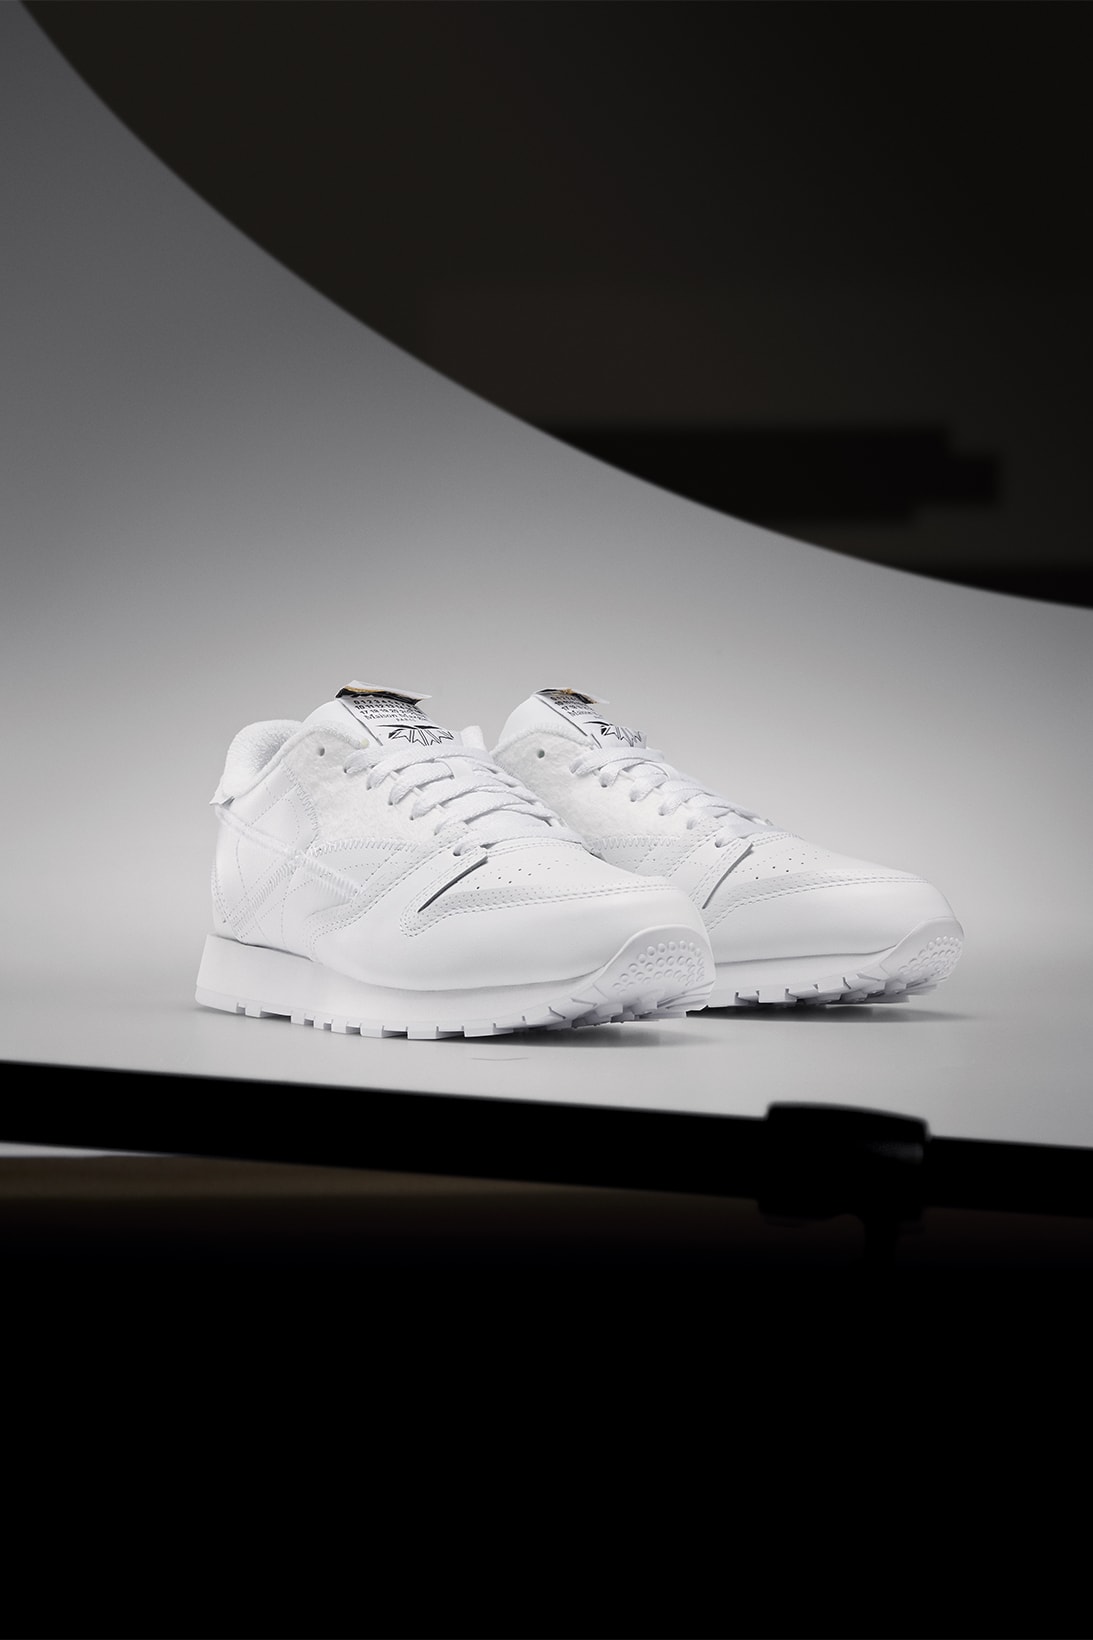 Maison Margiela Reebok The Memory Of Collection Black White Lateral